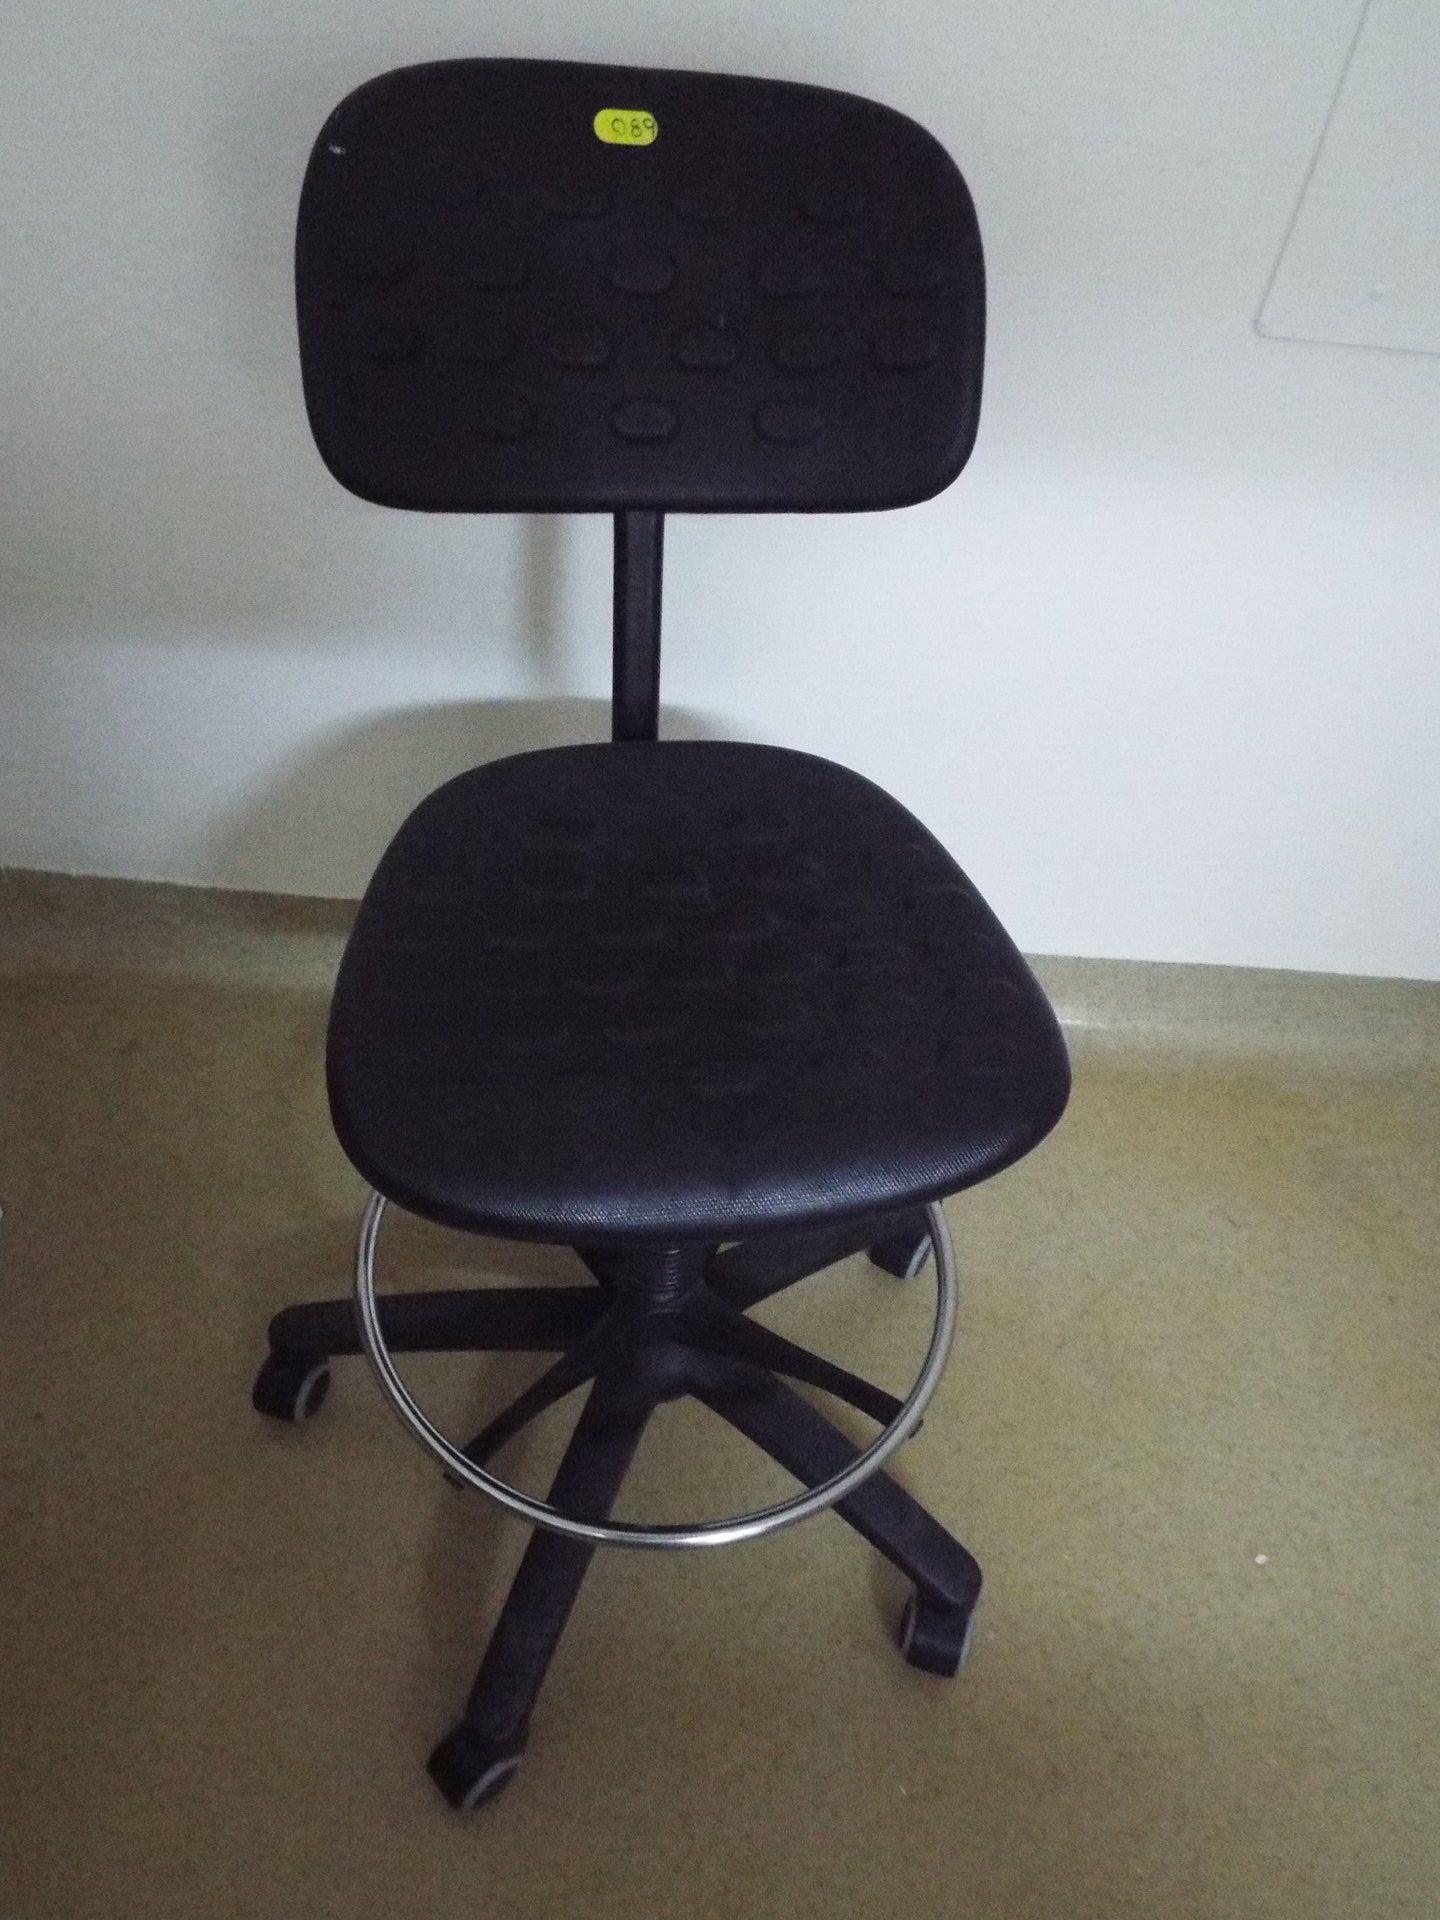 (6) elevating working chairs on casters